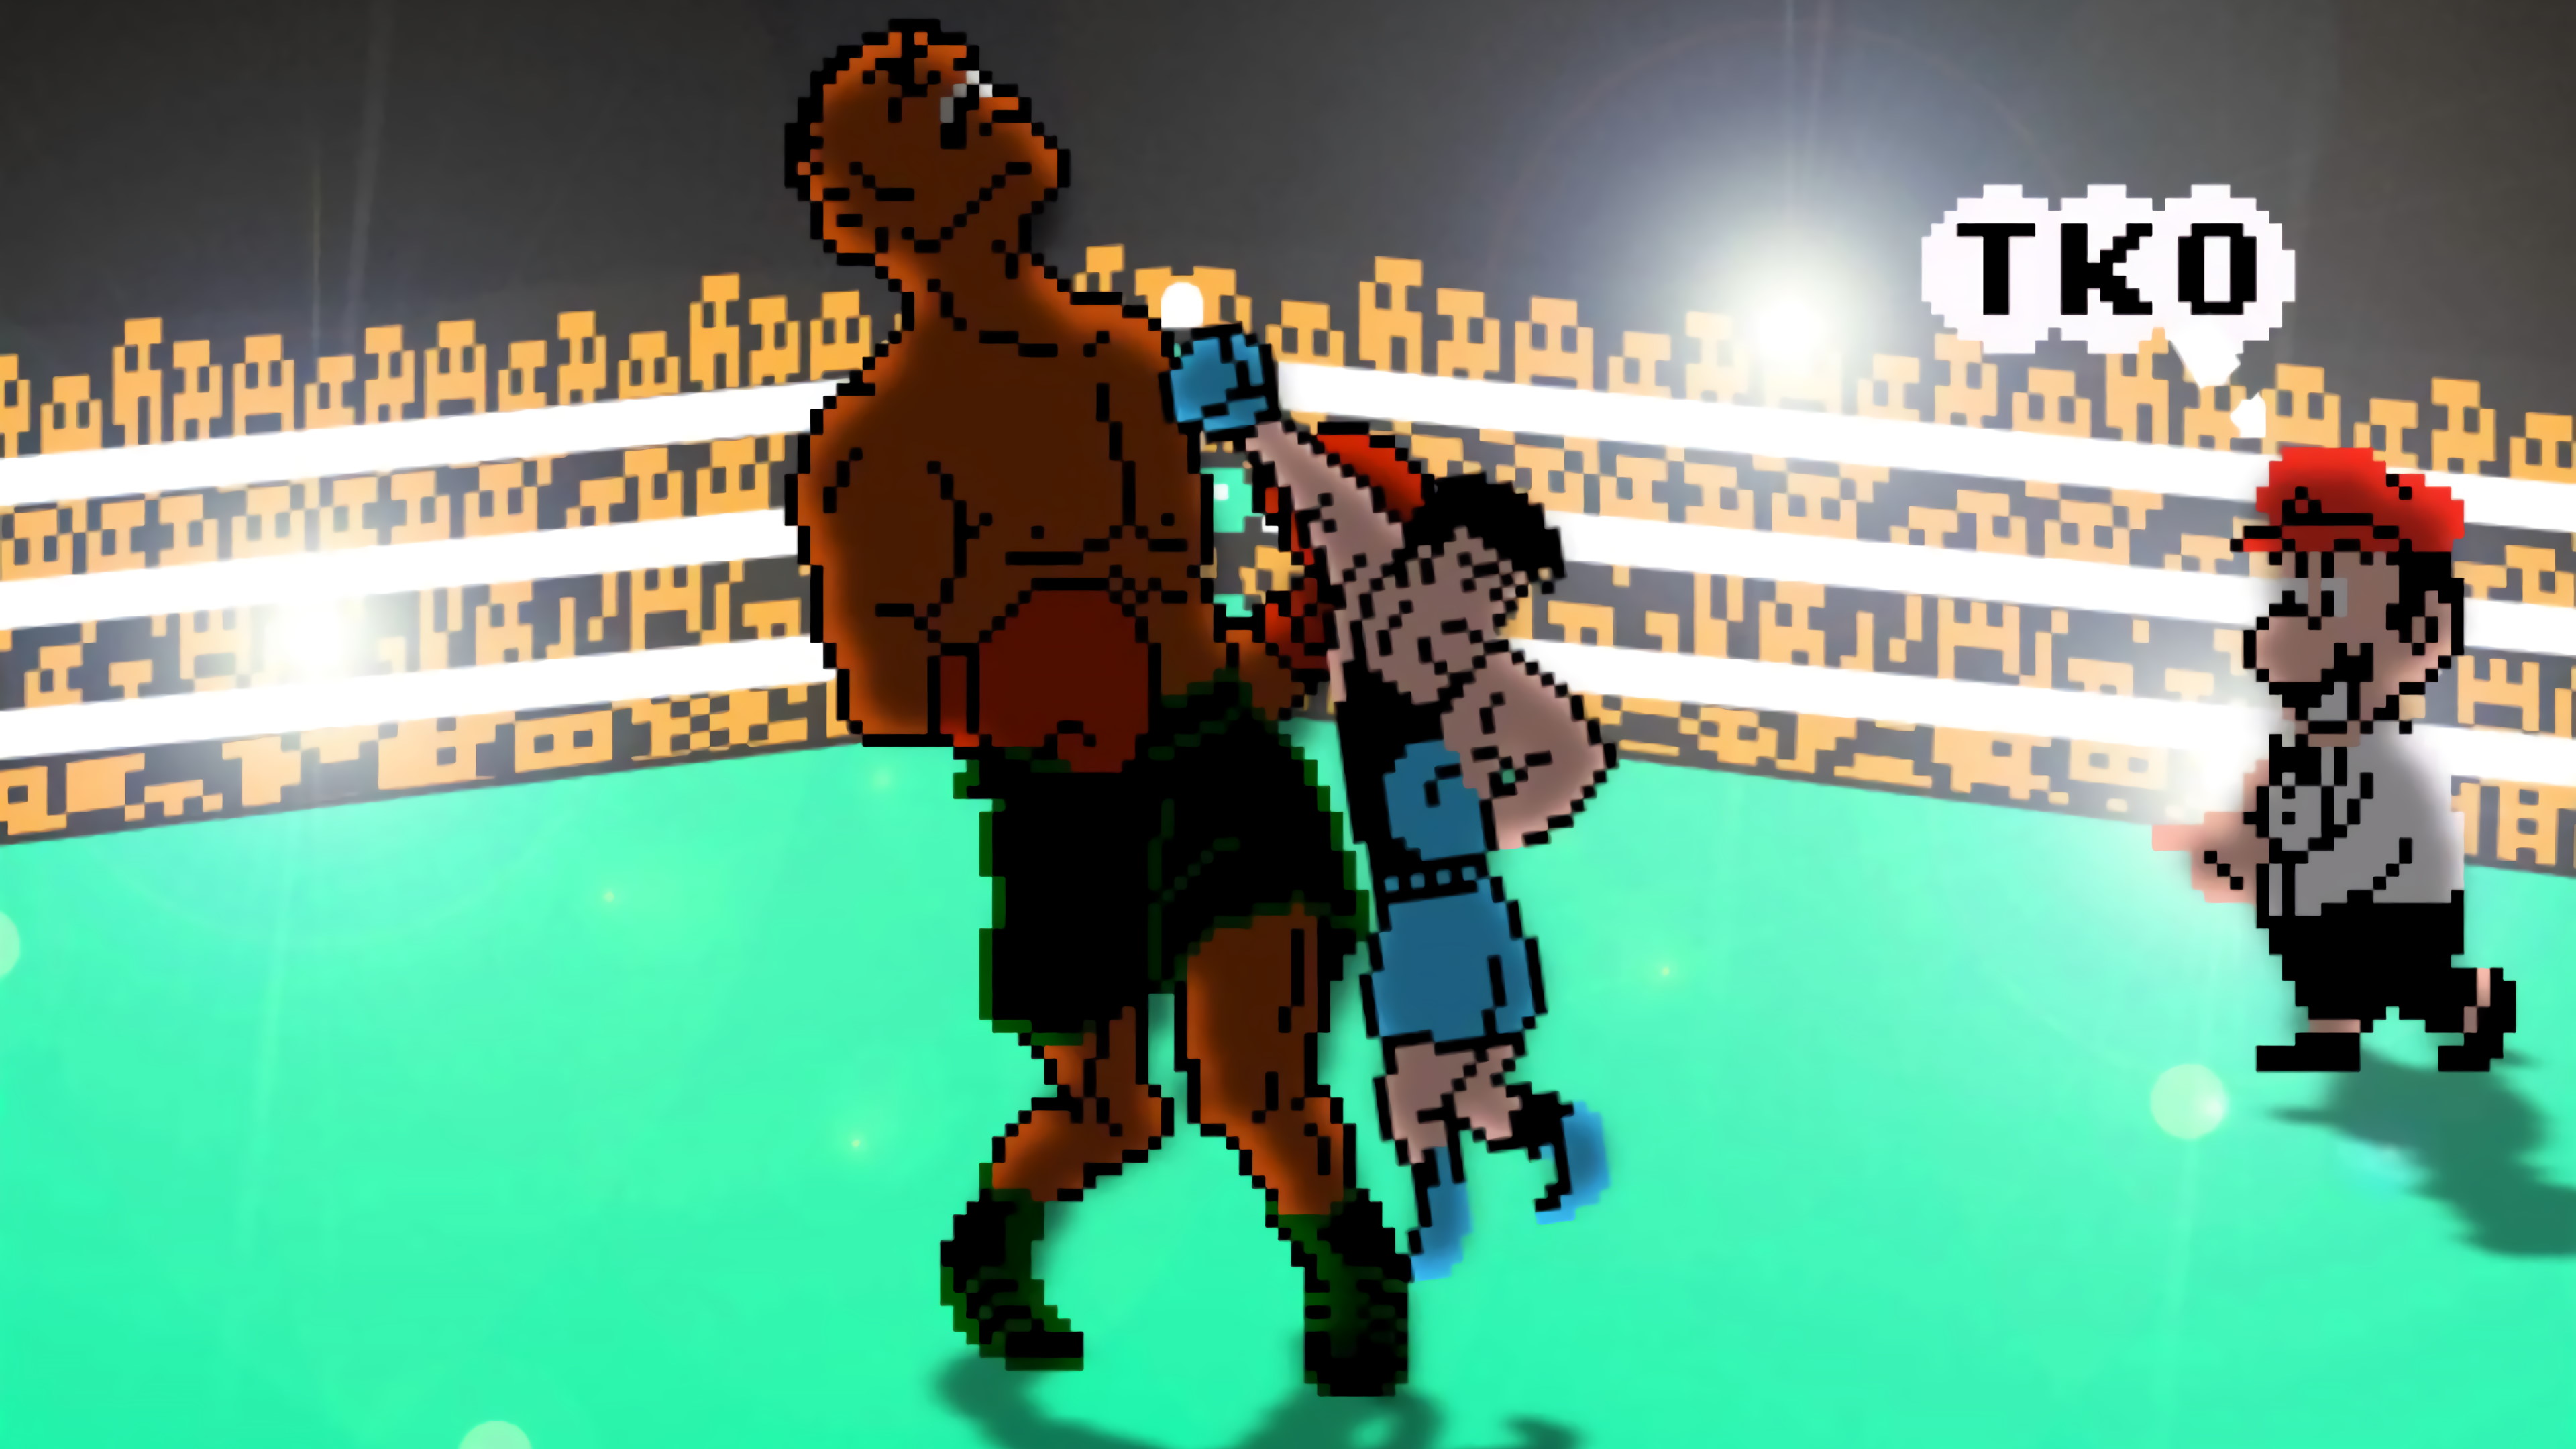 Mike gaming. Mike Tyson's Punch-out!! NES. Майк Тайсон Панч аут. Mike Tyson's Punch out. Punch out игра.